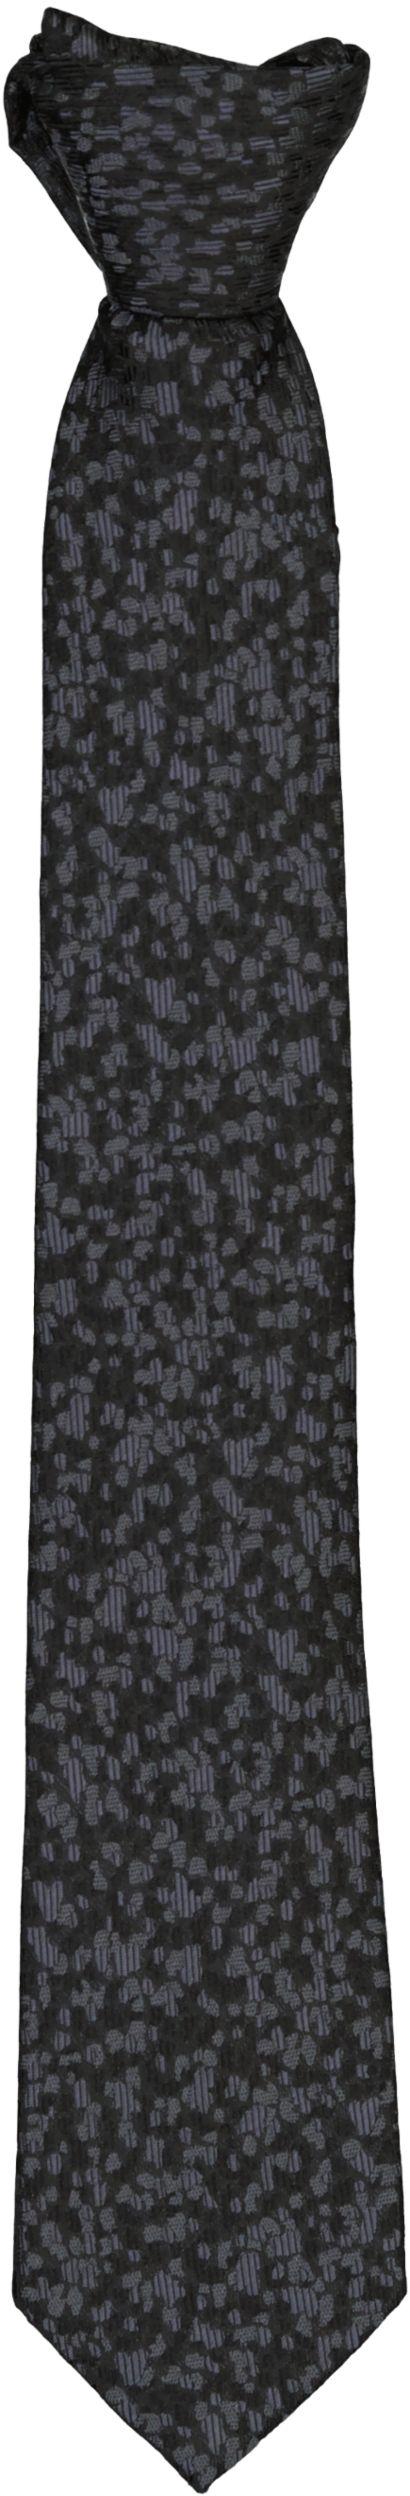 T.O. Collection Mens Necktie - TO261